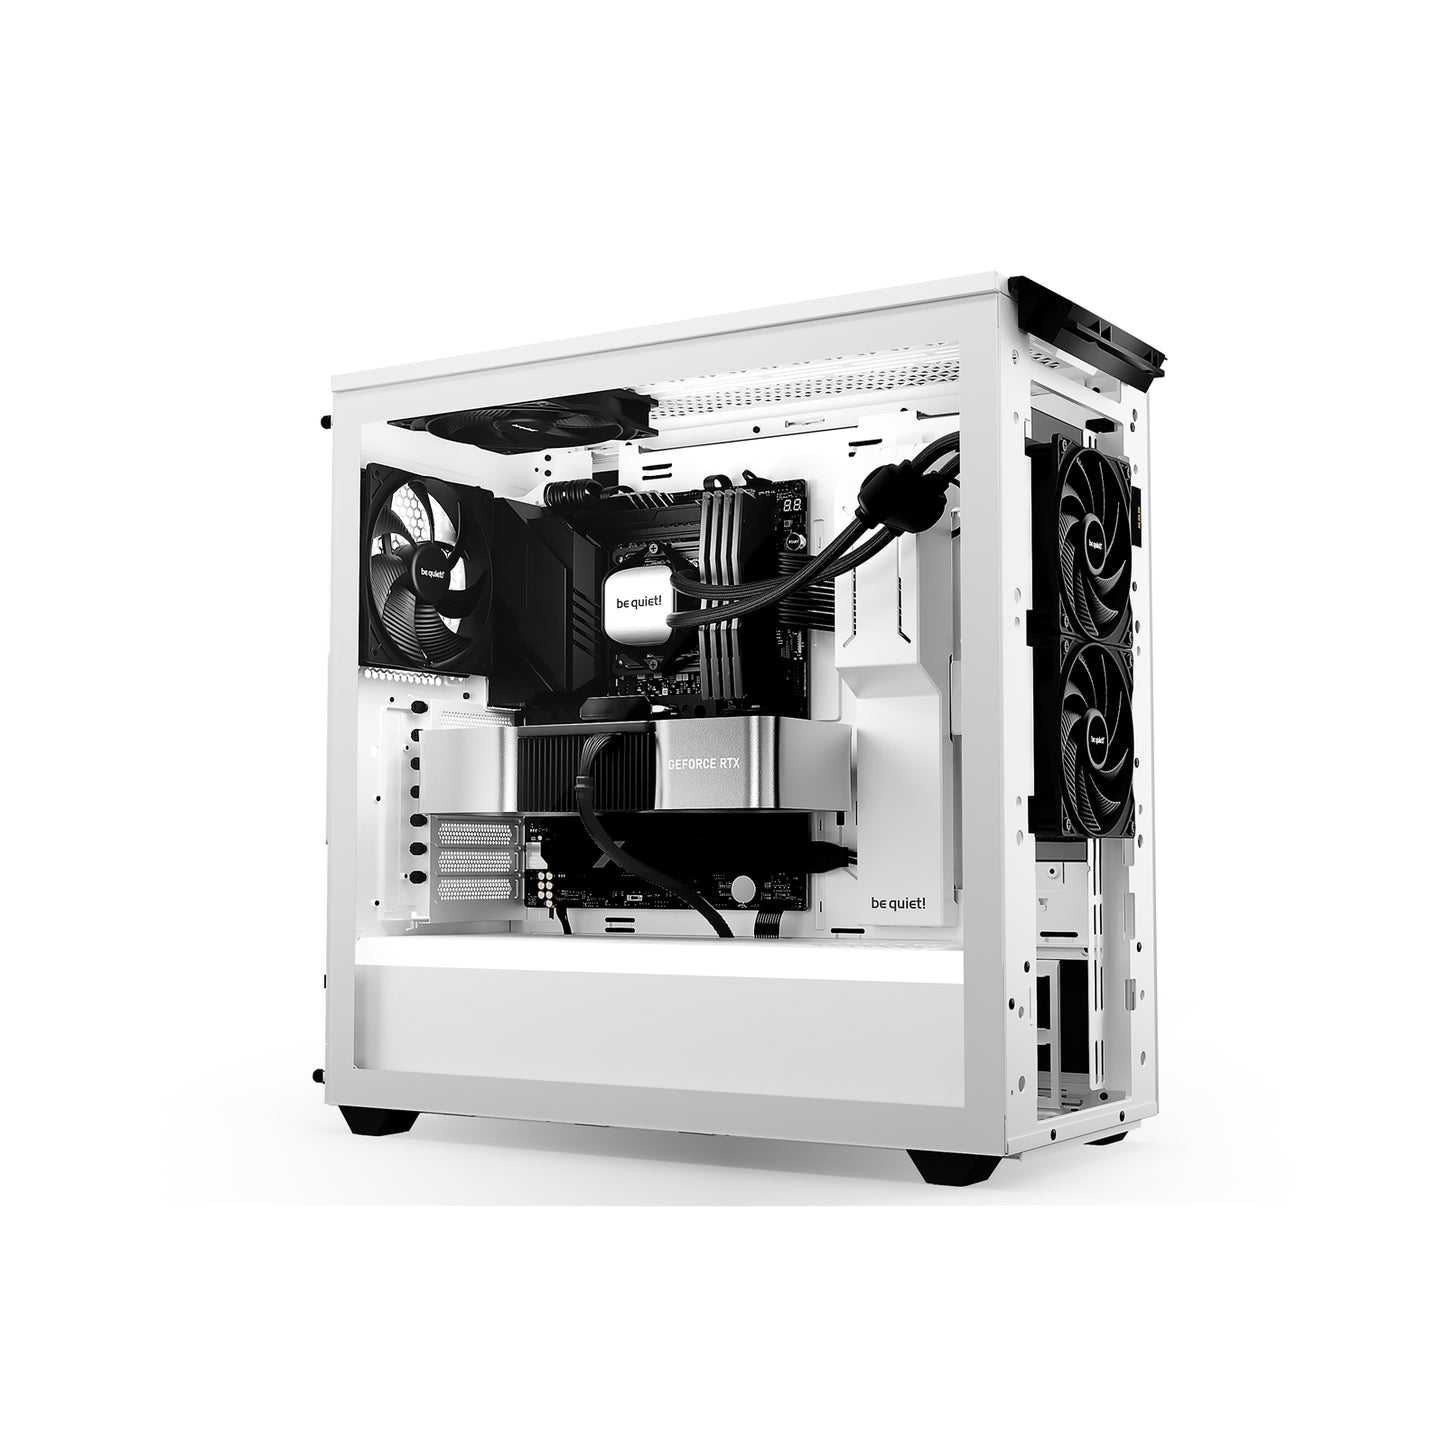 be quiet! Pure Loop 2 240mm AIO CPU Water Cooler